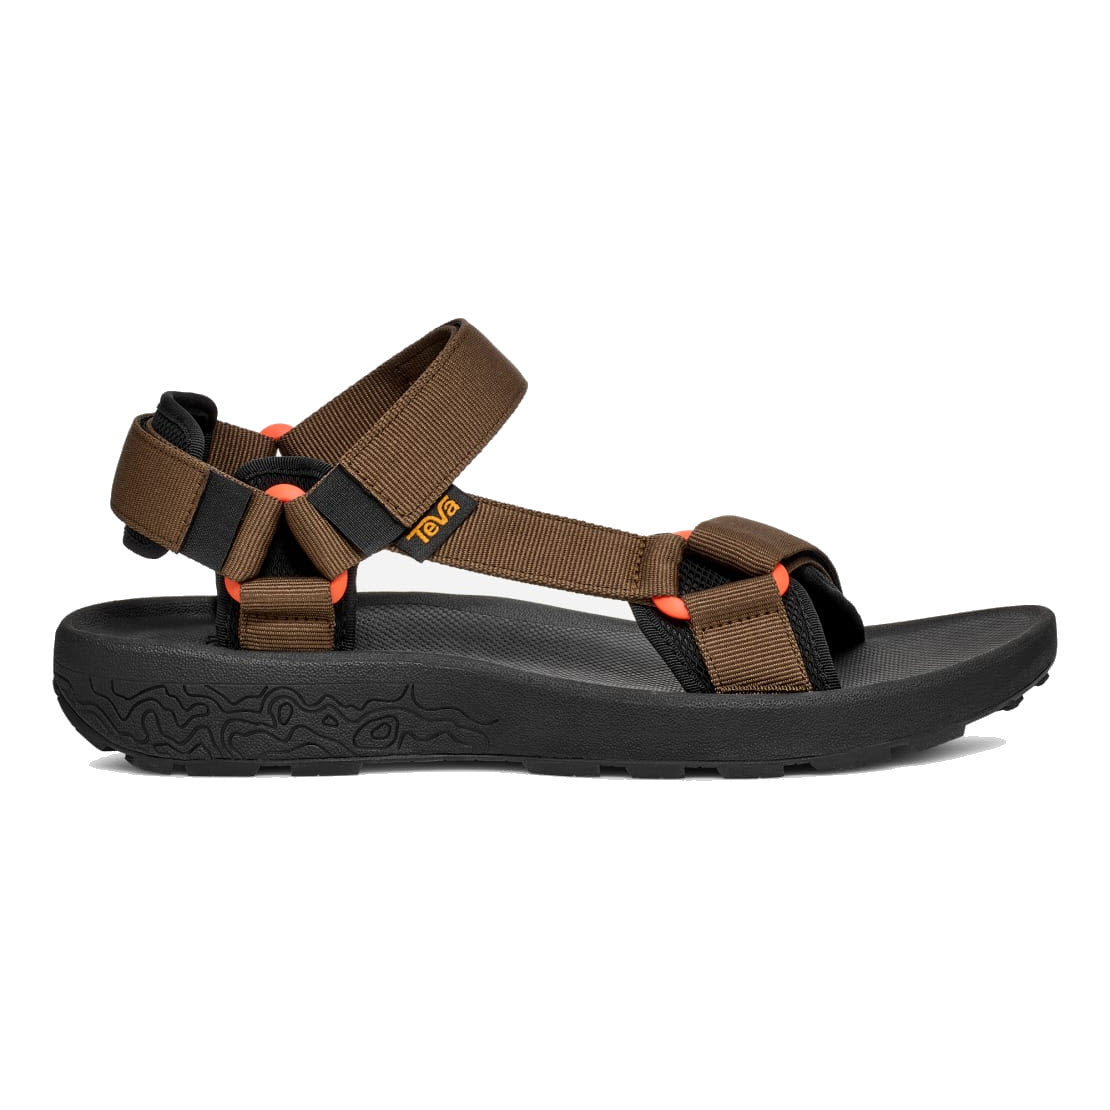 A single brown and black Teva Terragrip Sandal Desert Palm - Mens with adjustable straps and a thick sole, isolated on a white background.